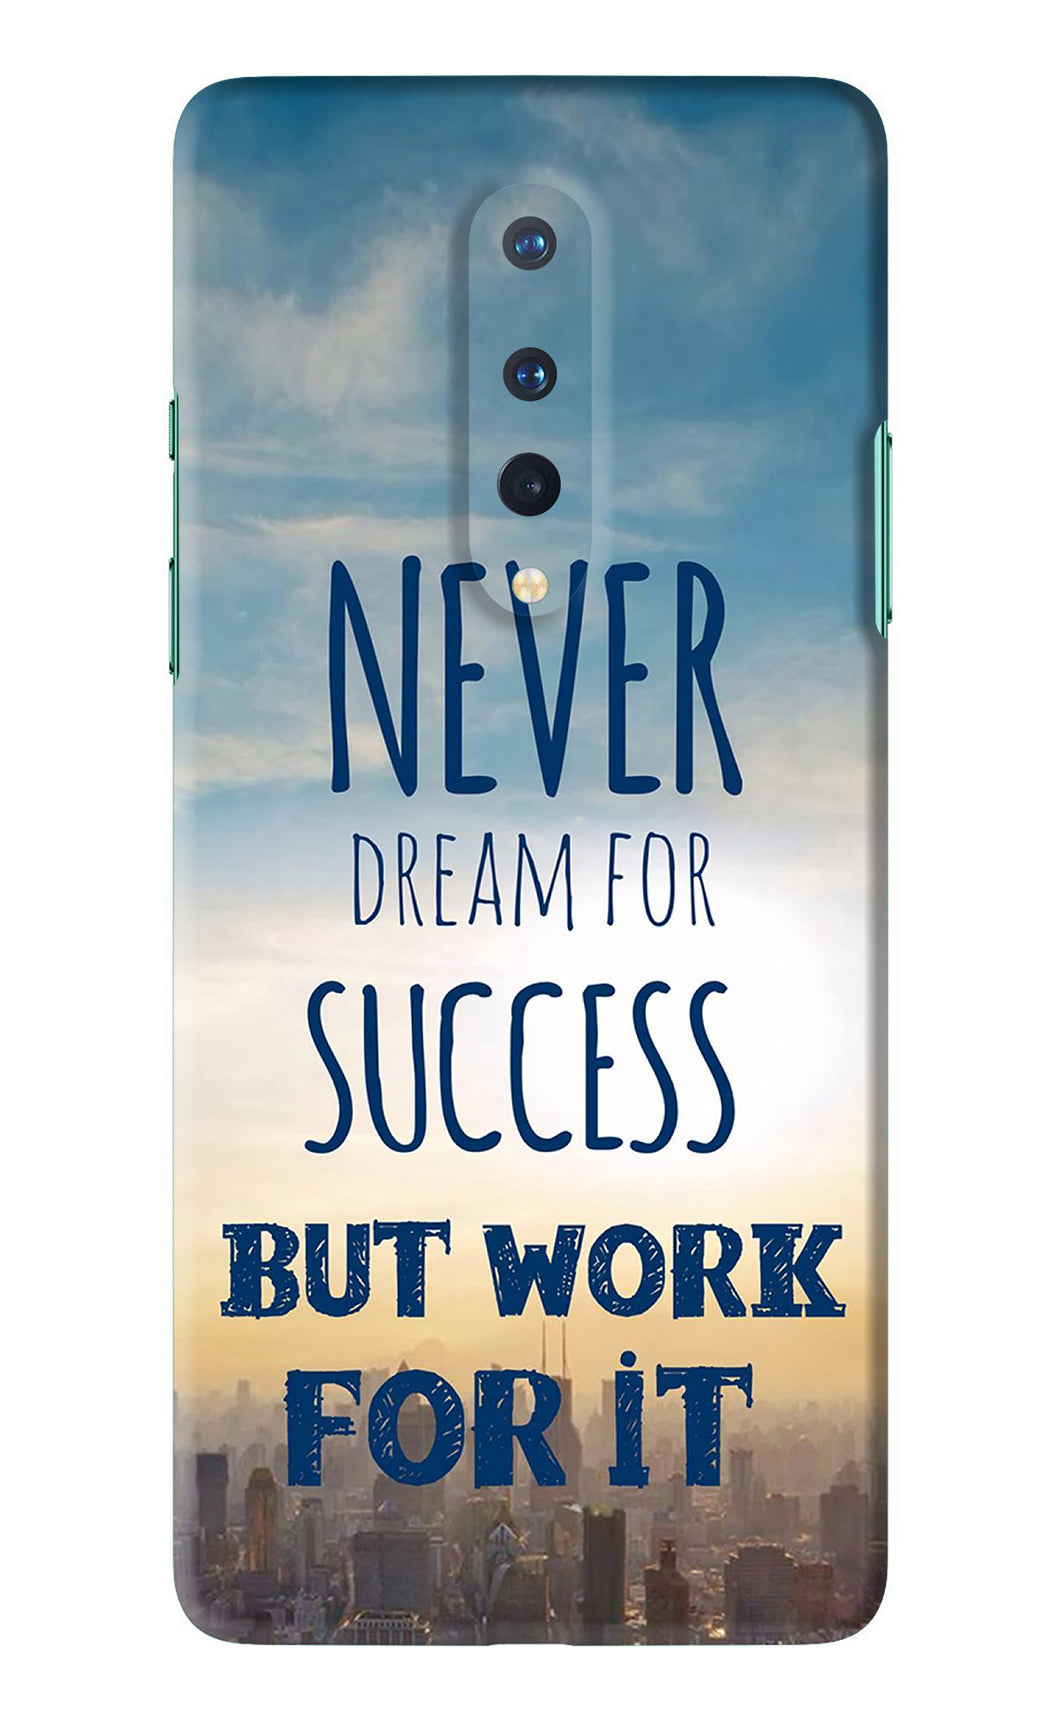 Never Dream For Success But Work For It OnePlus 8 Back Skin Wrap